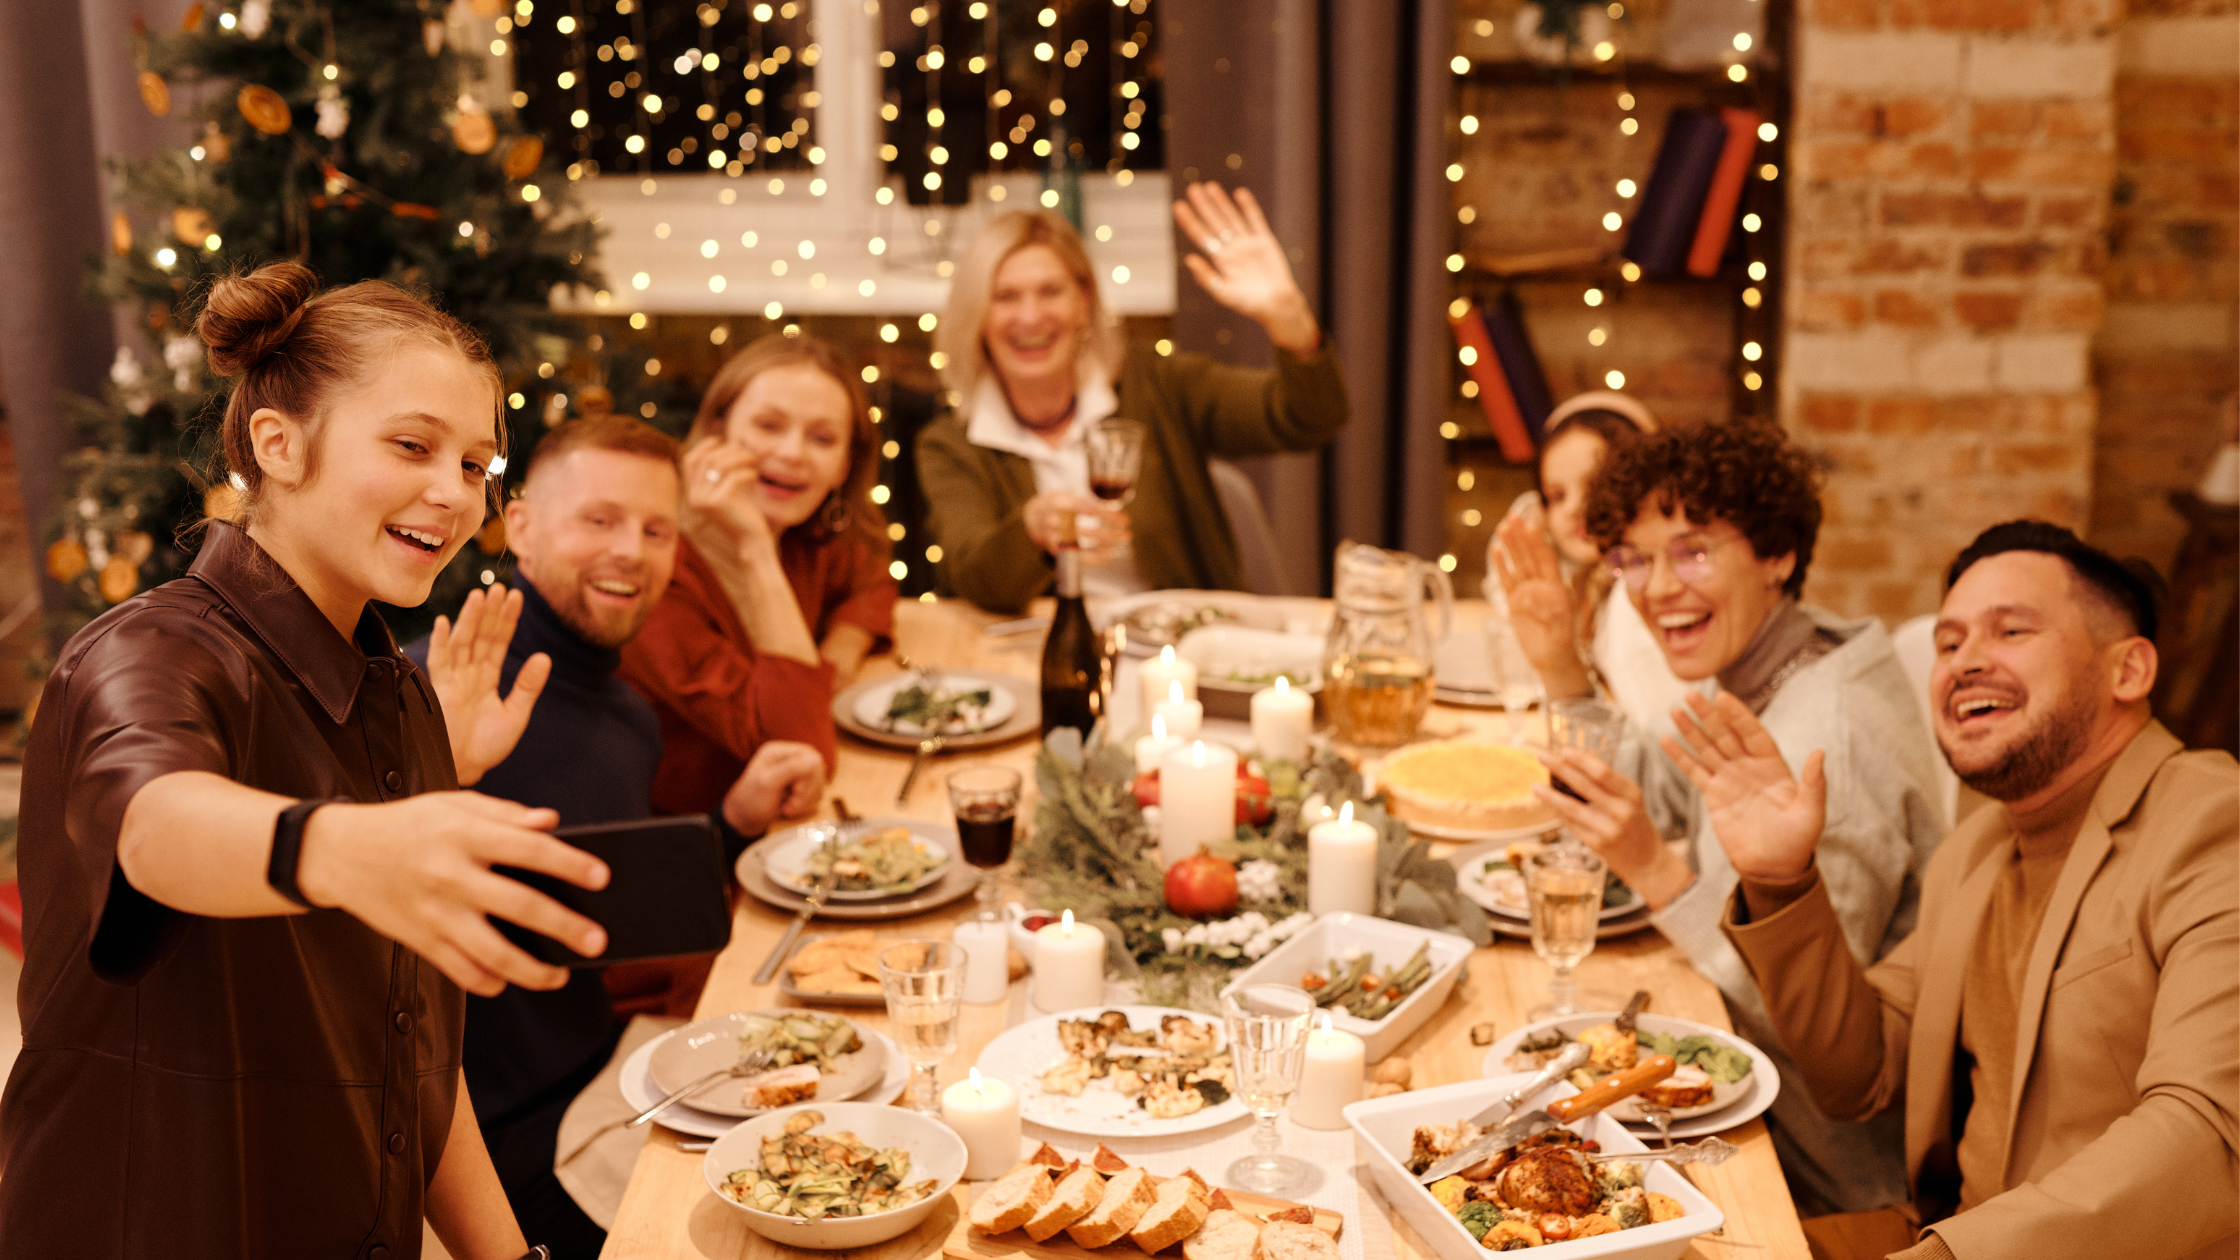 How To Throw A Great Holiday Party - Cool Tips and Tricks